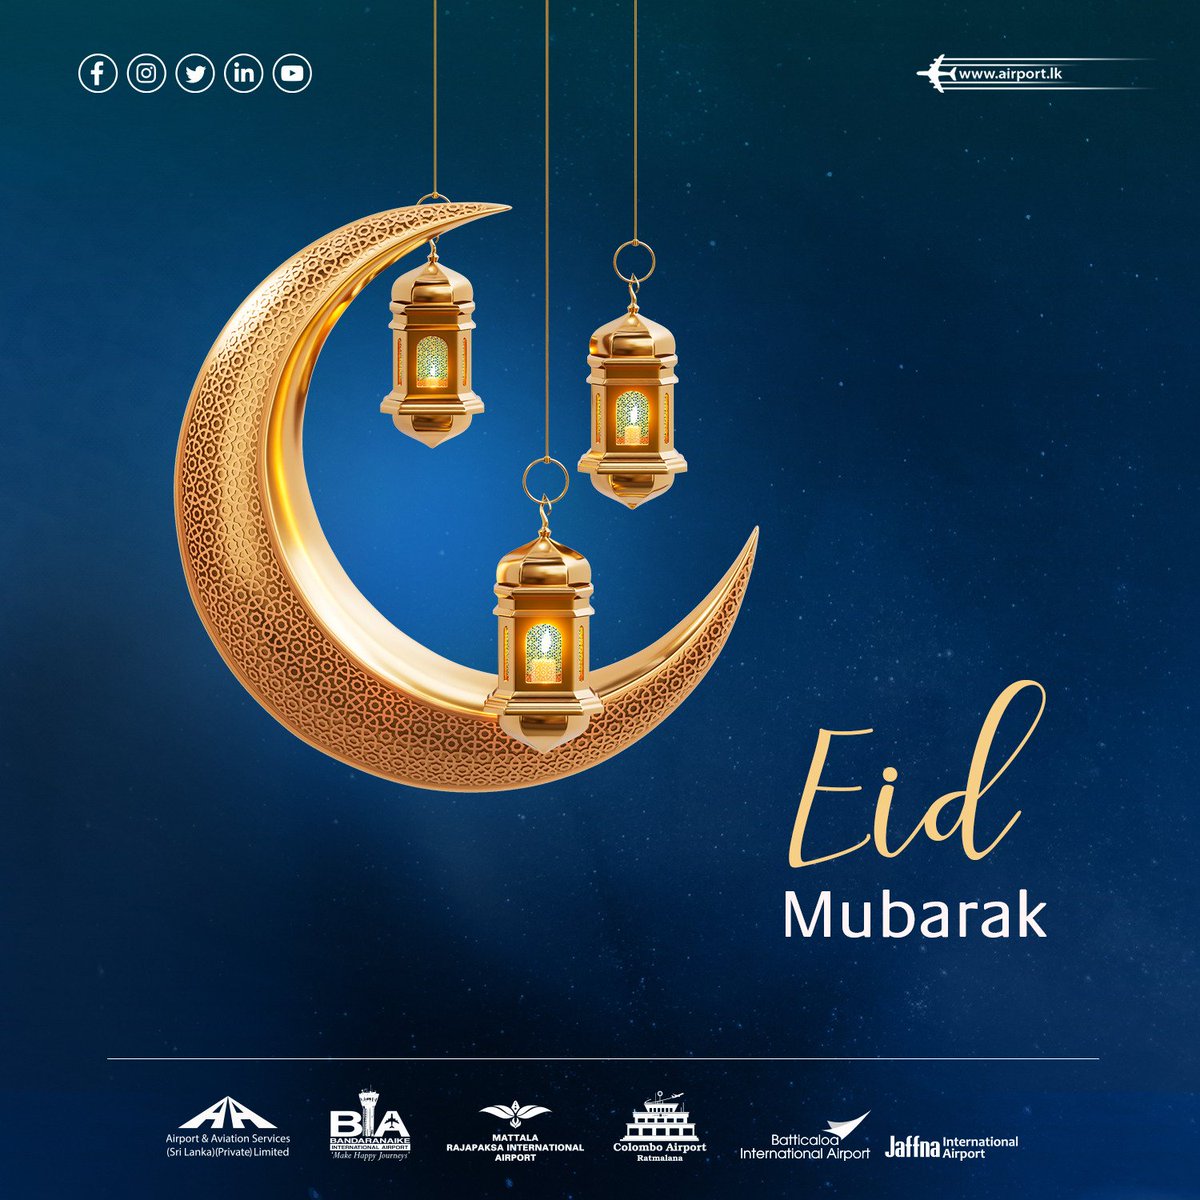 Happy Eid Mubarak from the BIA to yours! 🌙 May this special day bring peace, happiness, and prosperity to you! #SriLankaAirports #BIAsrilanka #EidMubarak